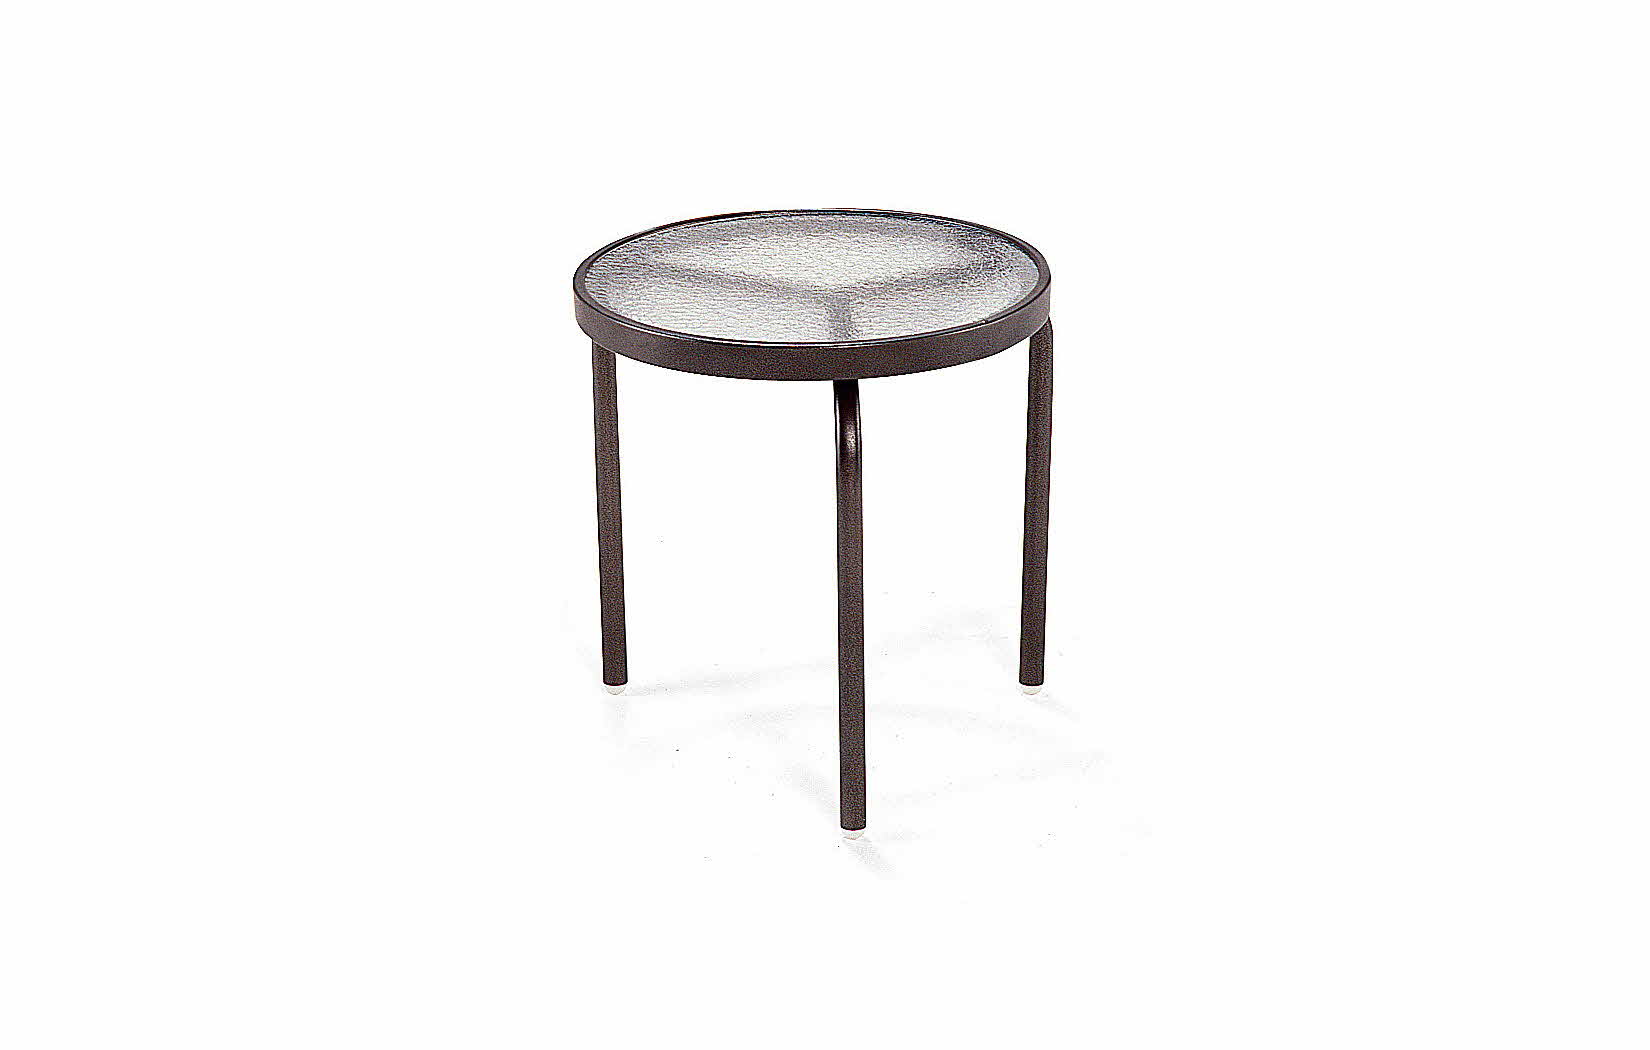 outdoor side tables commercial furniture texacraft main table grey acrylic top gold desk lamp modern end with drawer glass entrance threshold accent unfinished dining legs porch